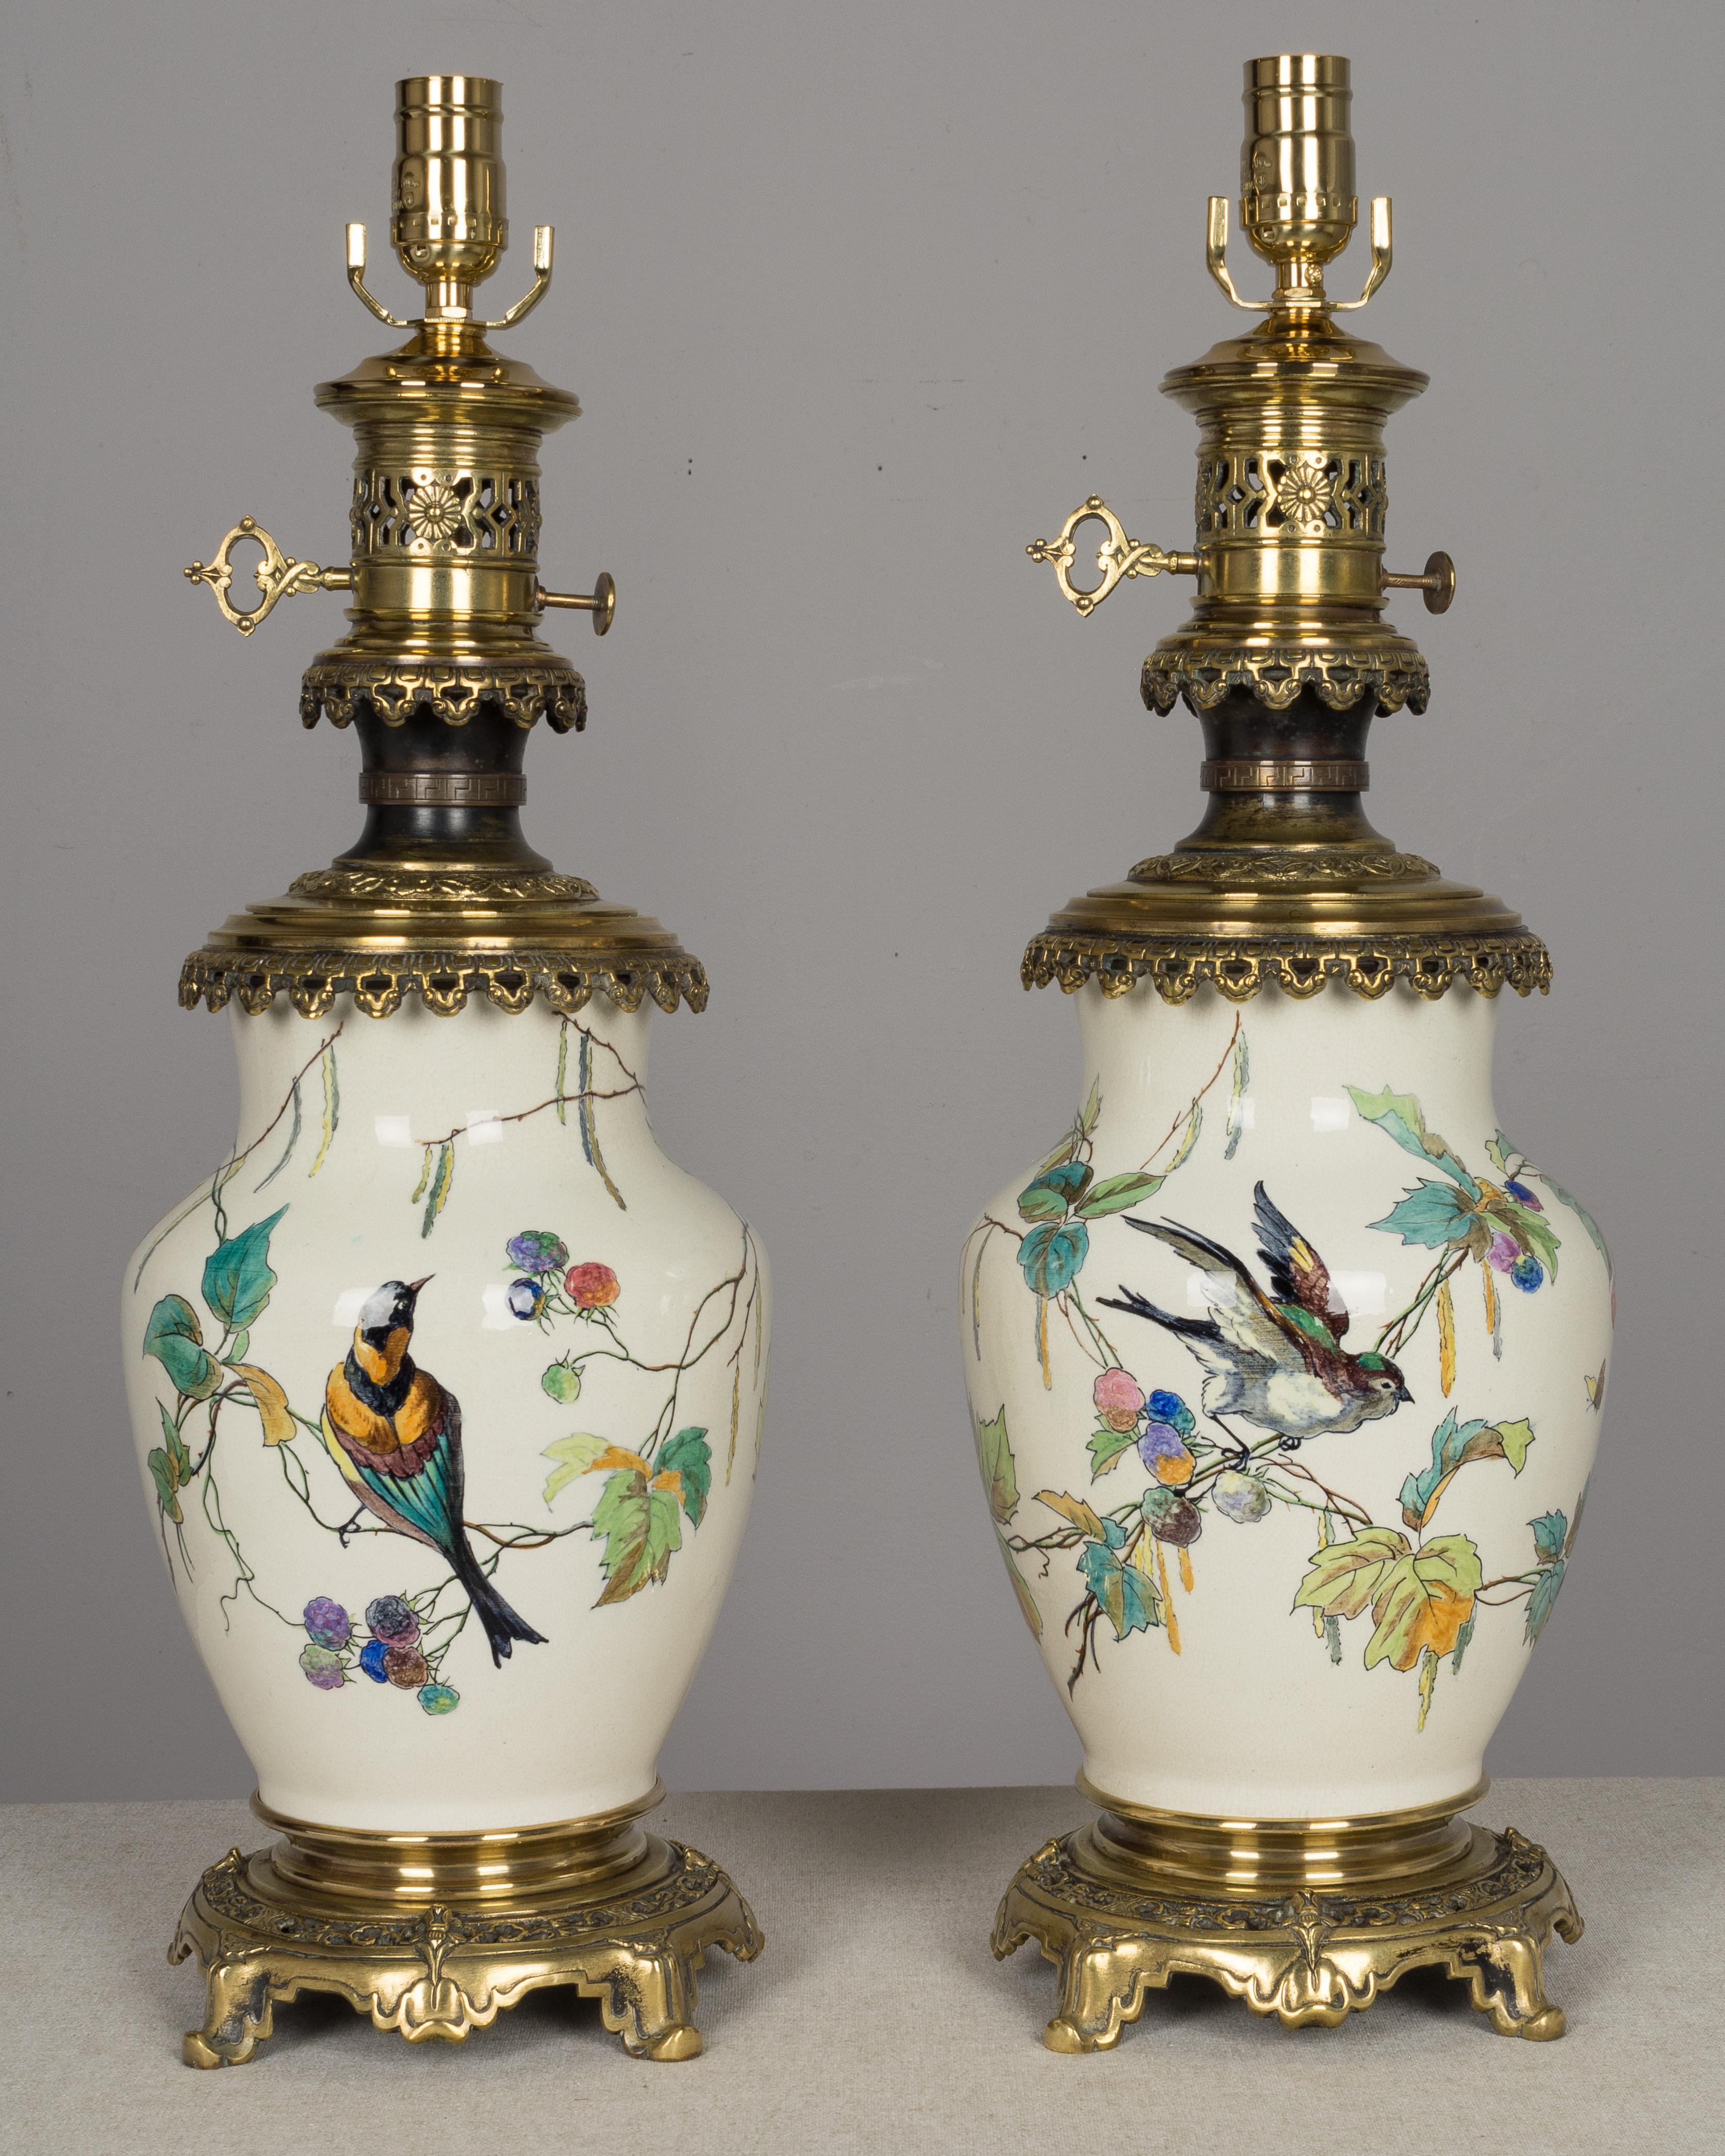 A pair of rare 19th century French bronze-mounted Sevres ceramic lamps, beautifully hand painted by Charles Ficquenet in the manner of Theodore Deck. Four different birds, each painted in colorful detail, perch on branches with pale green leaves and